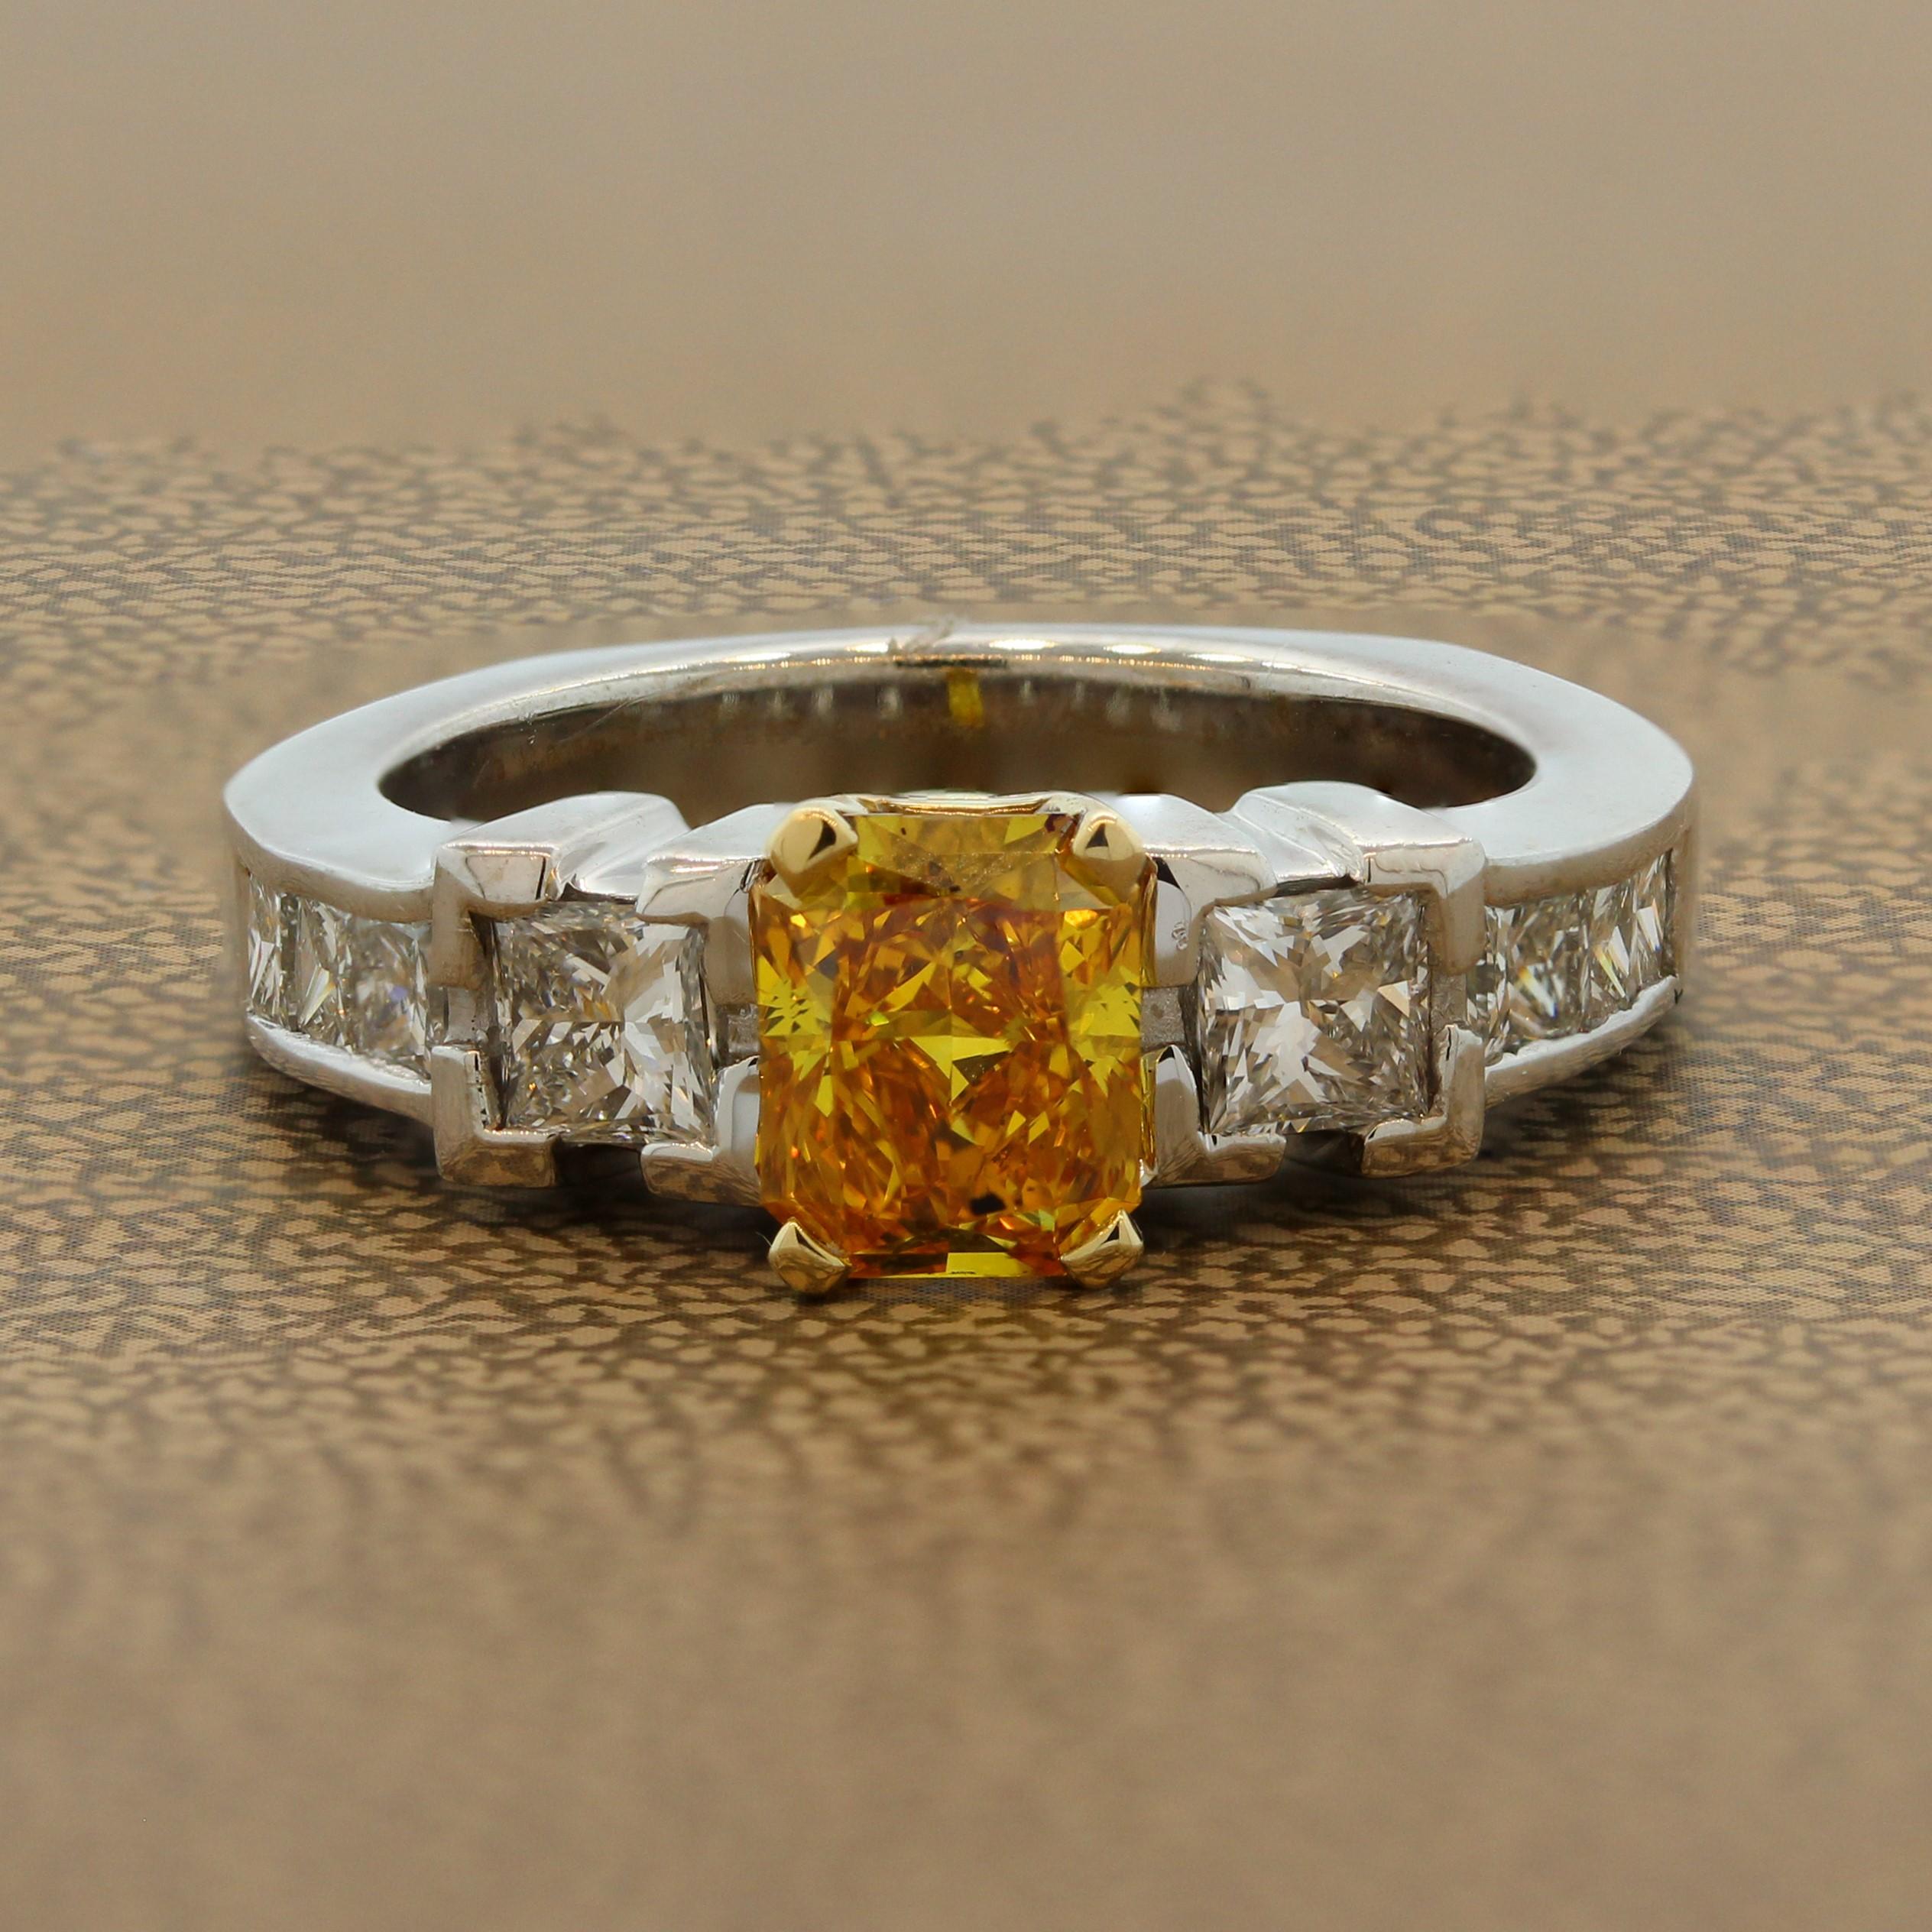 Stand out with an exquisite ring featuring a 1.01 carat orange-yellow diamond. The radiant cut diamond is accented by 1.10 carts of princess cut diamonds in a 14K white gold setting. There is great contrast between the vivid fancy color diamond and